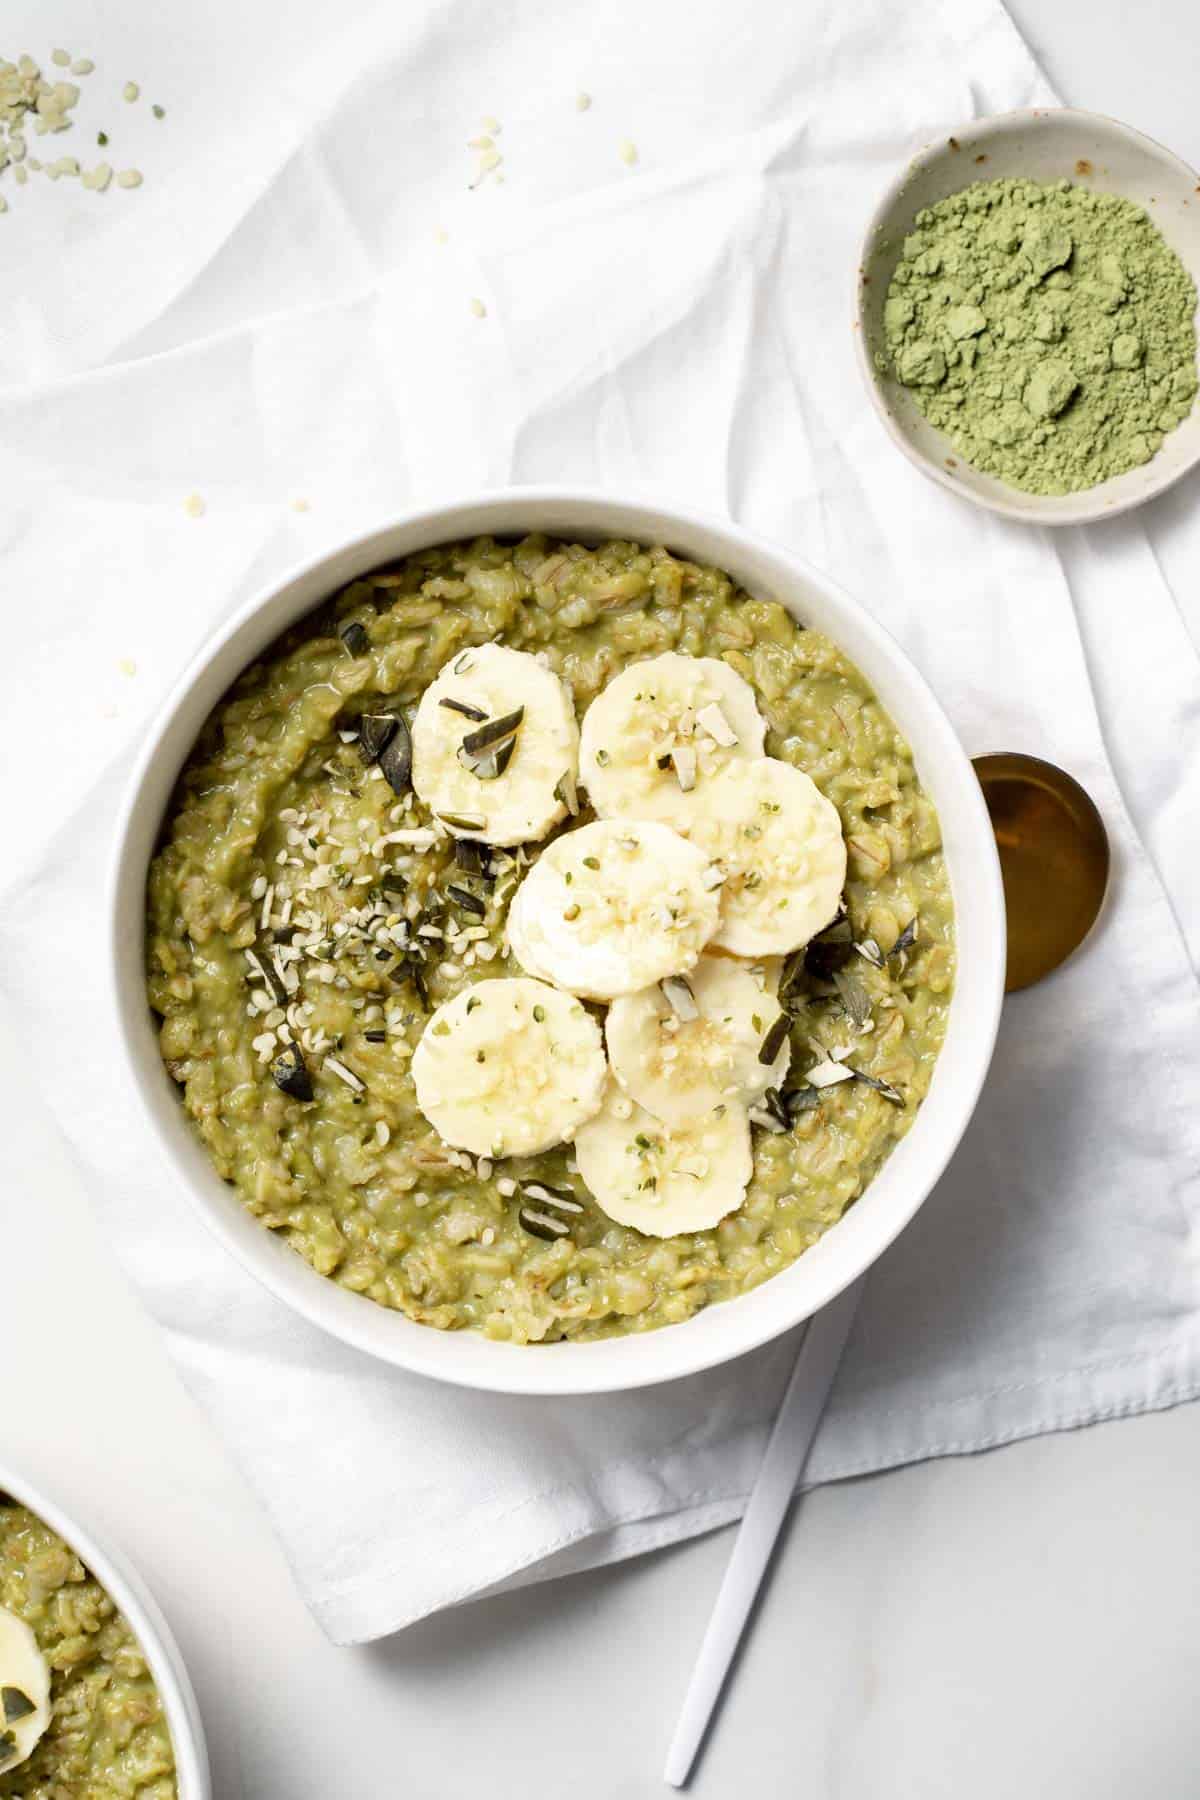 Overhead view of a bowl of matcha oatmeal with sliced bananas and a small bowl of matcha powder on the side.